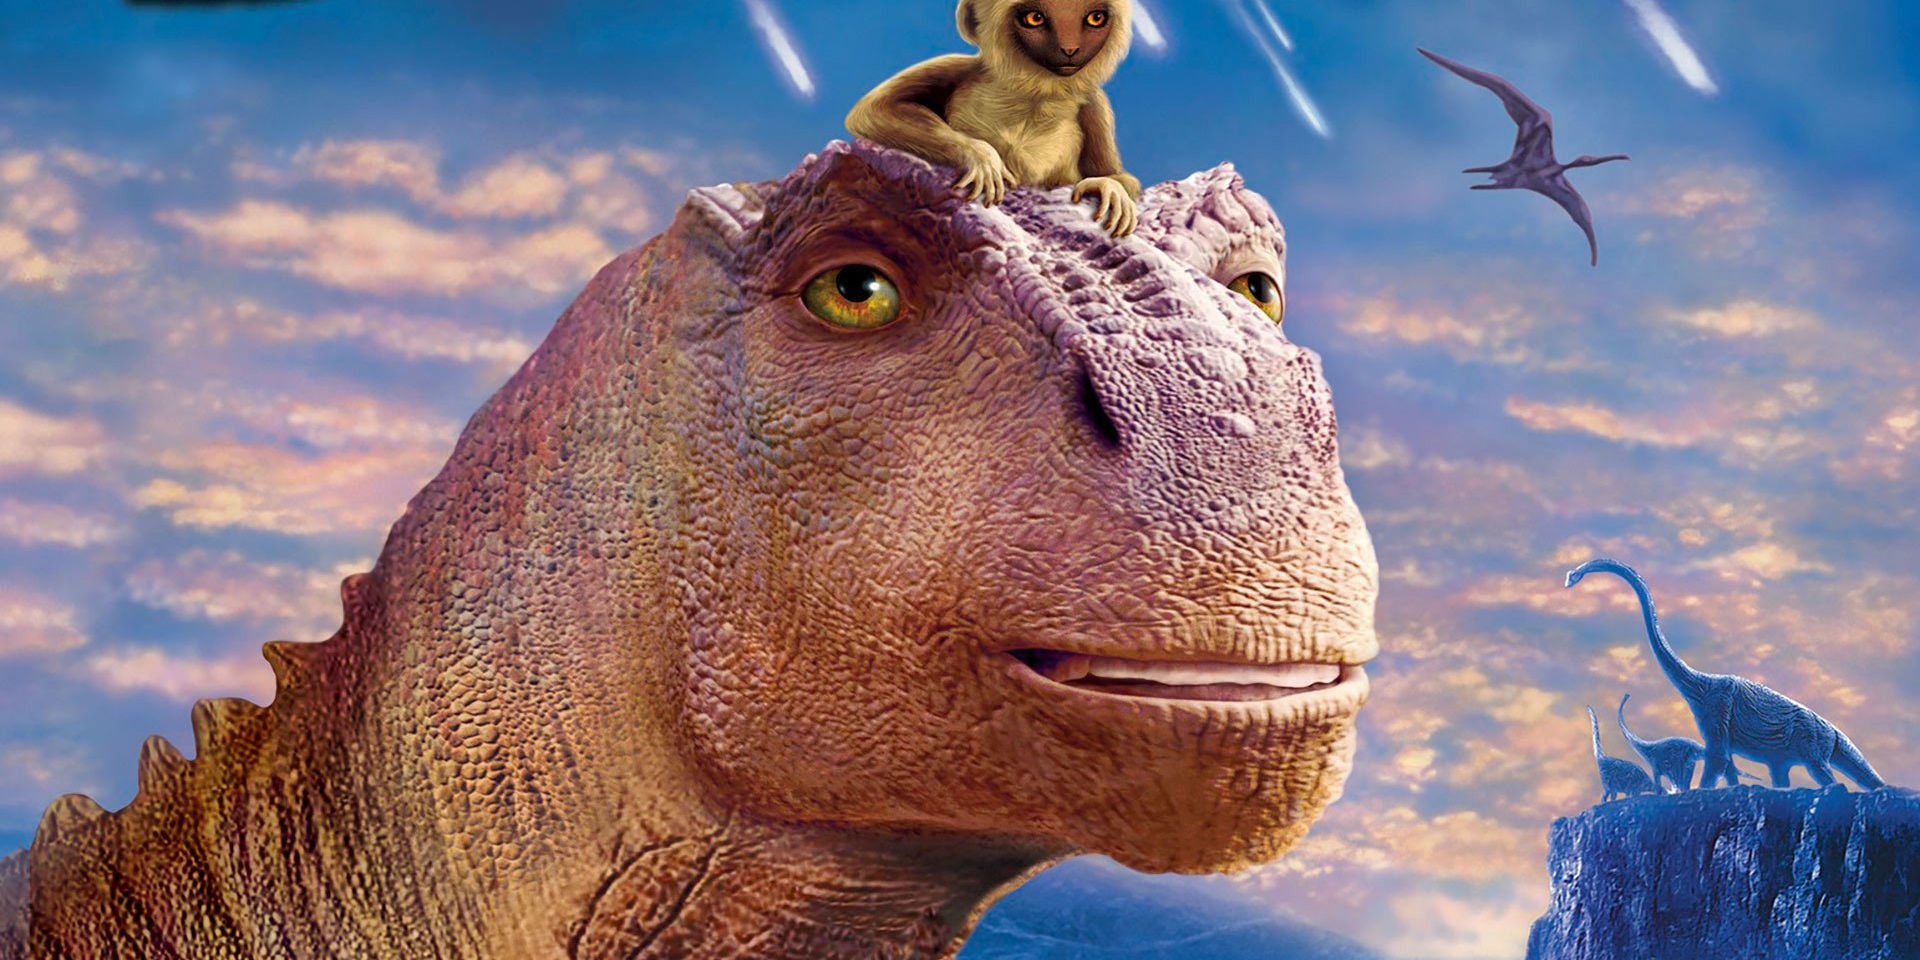 A dinosaur with a monkey-like creature on his head looks straight at the camera in Dinosaur.